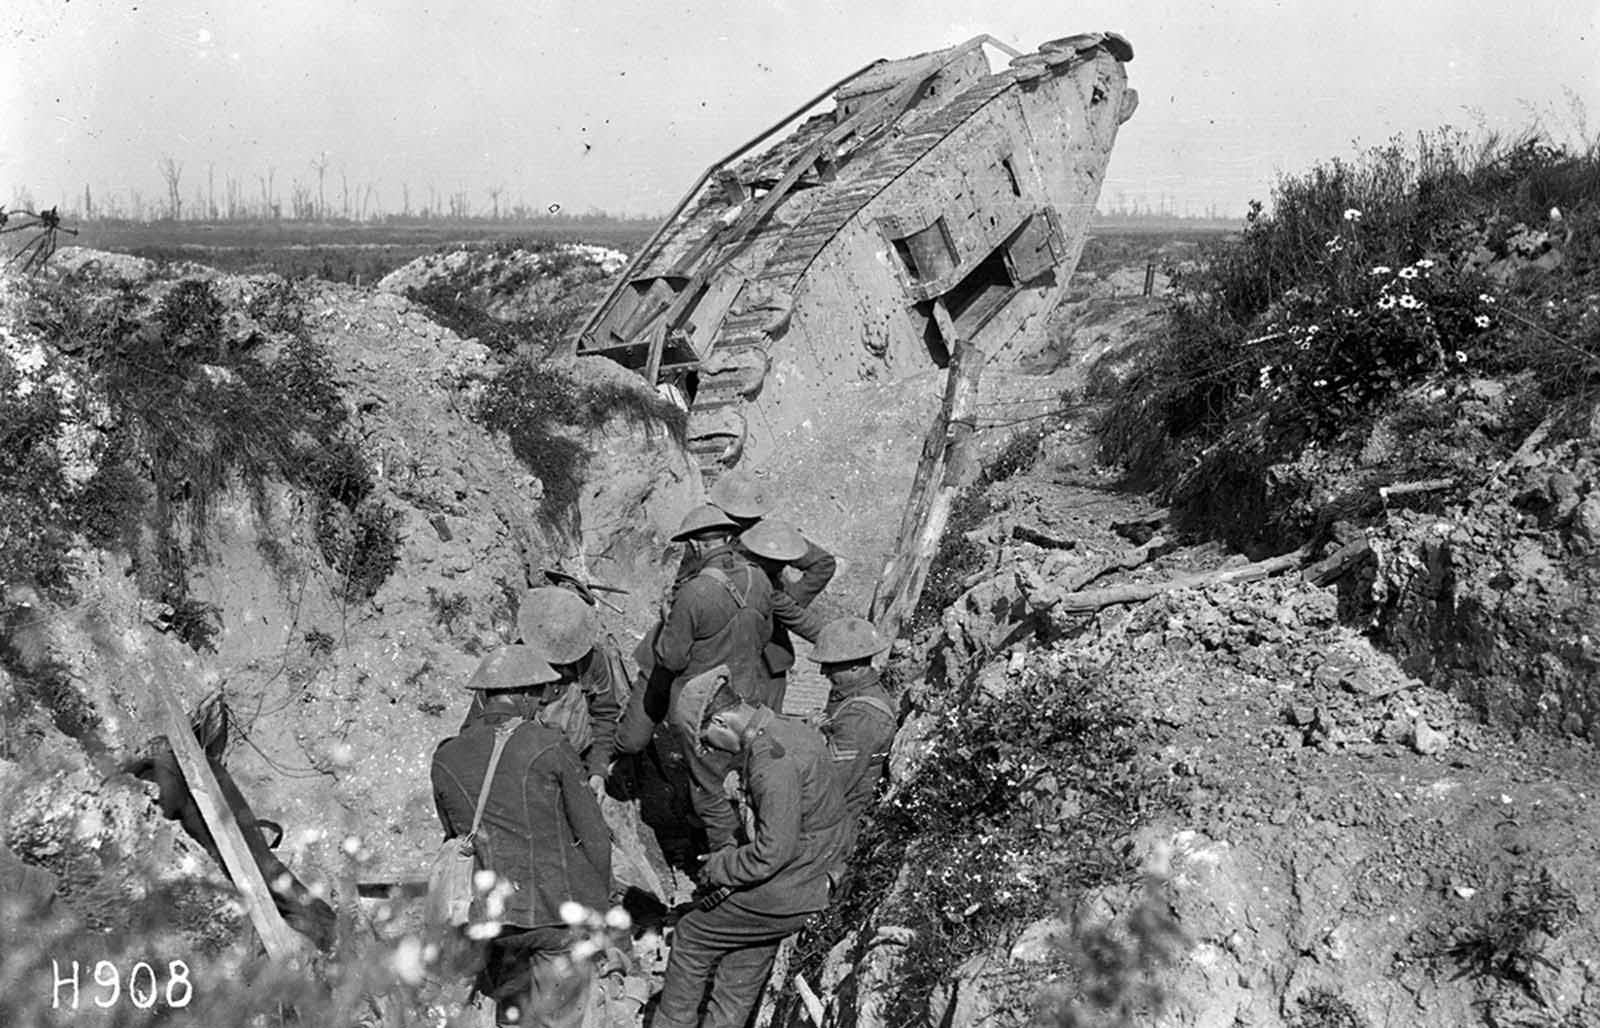 New Zealand troops and the tank “Jumping Jennie” in a trench at Gommecourt Wood, France, on August 10, 1918